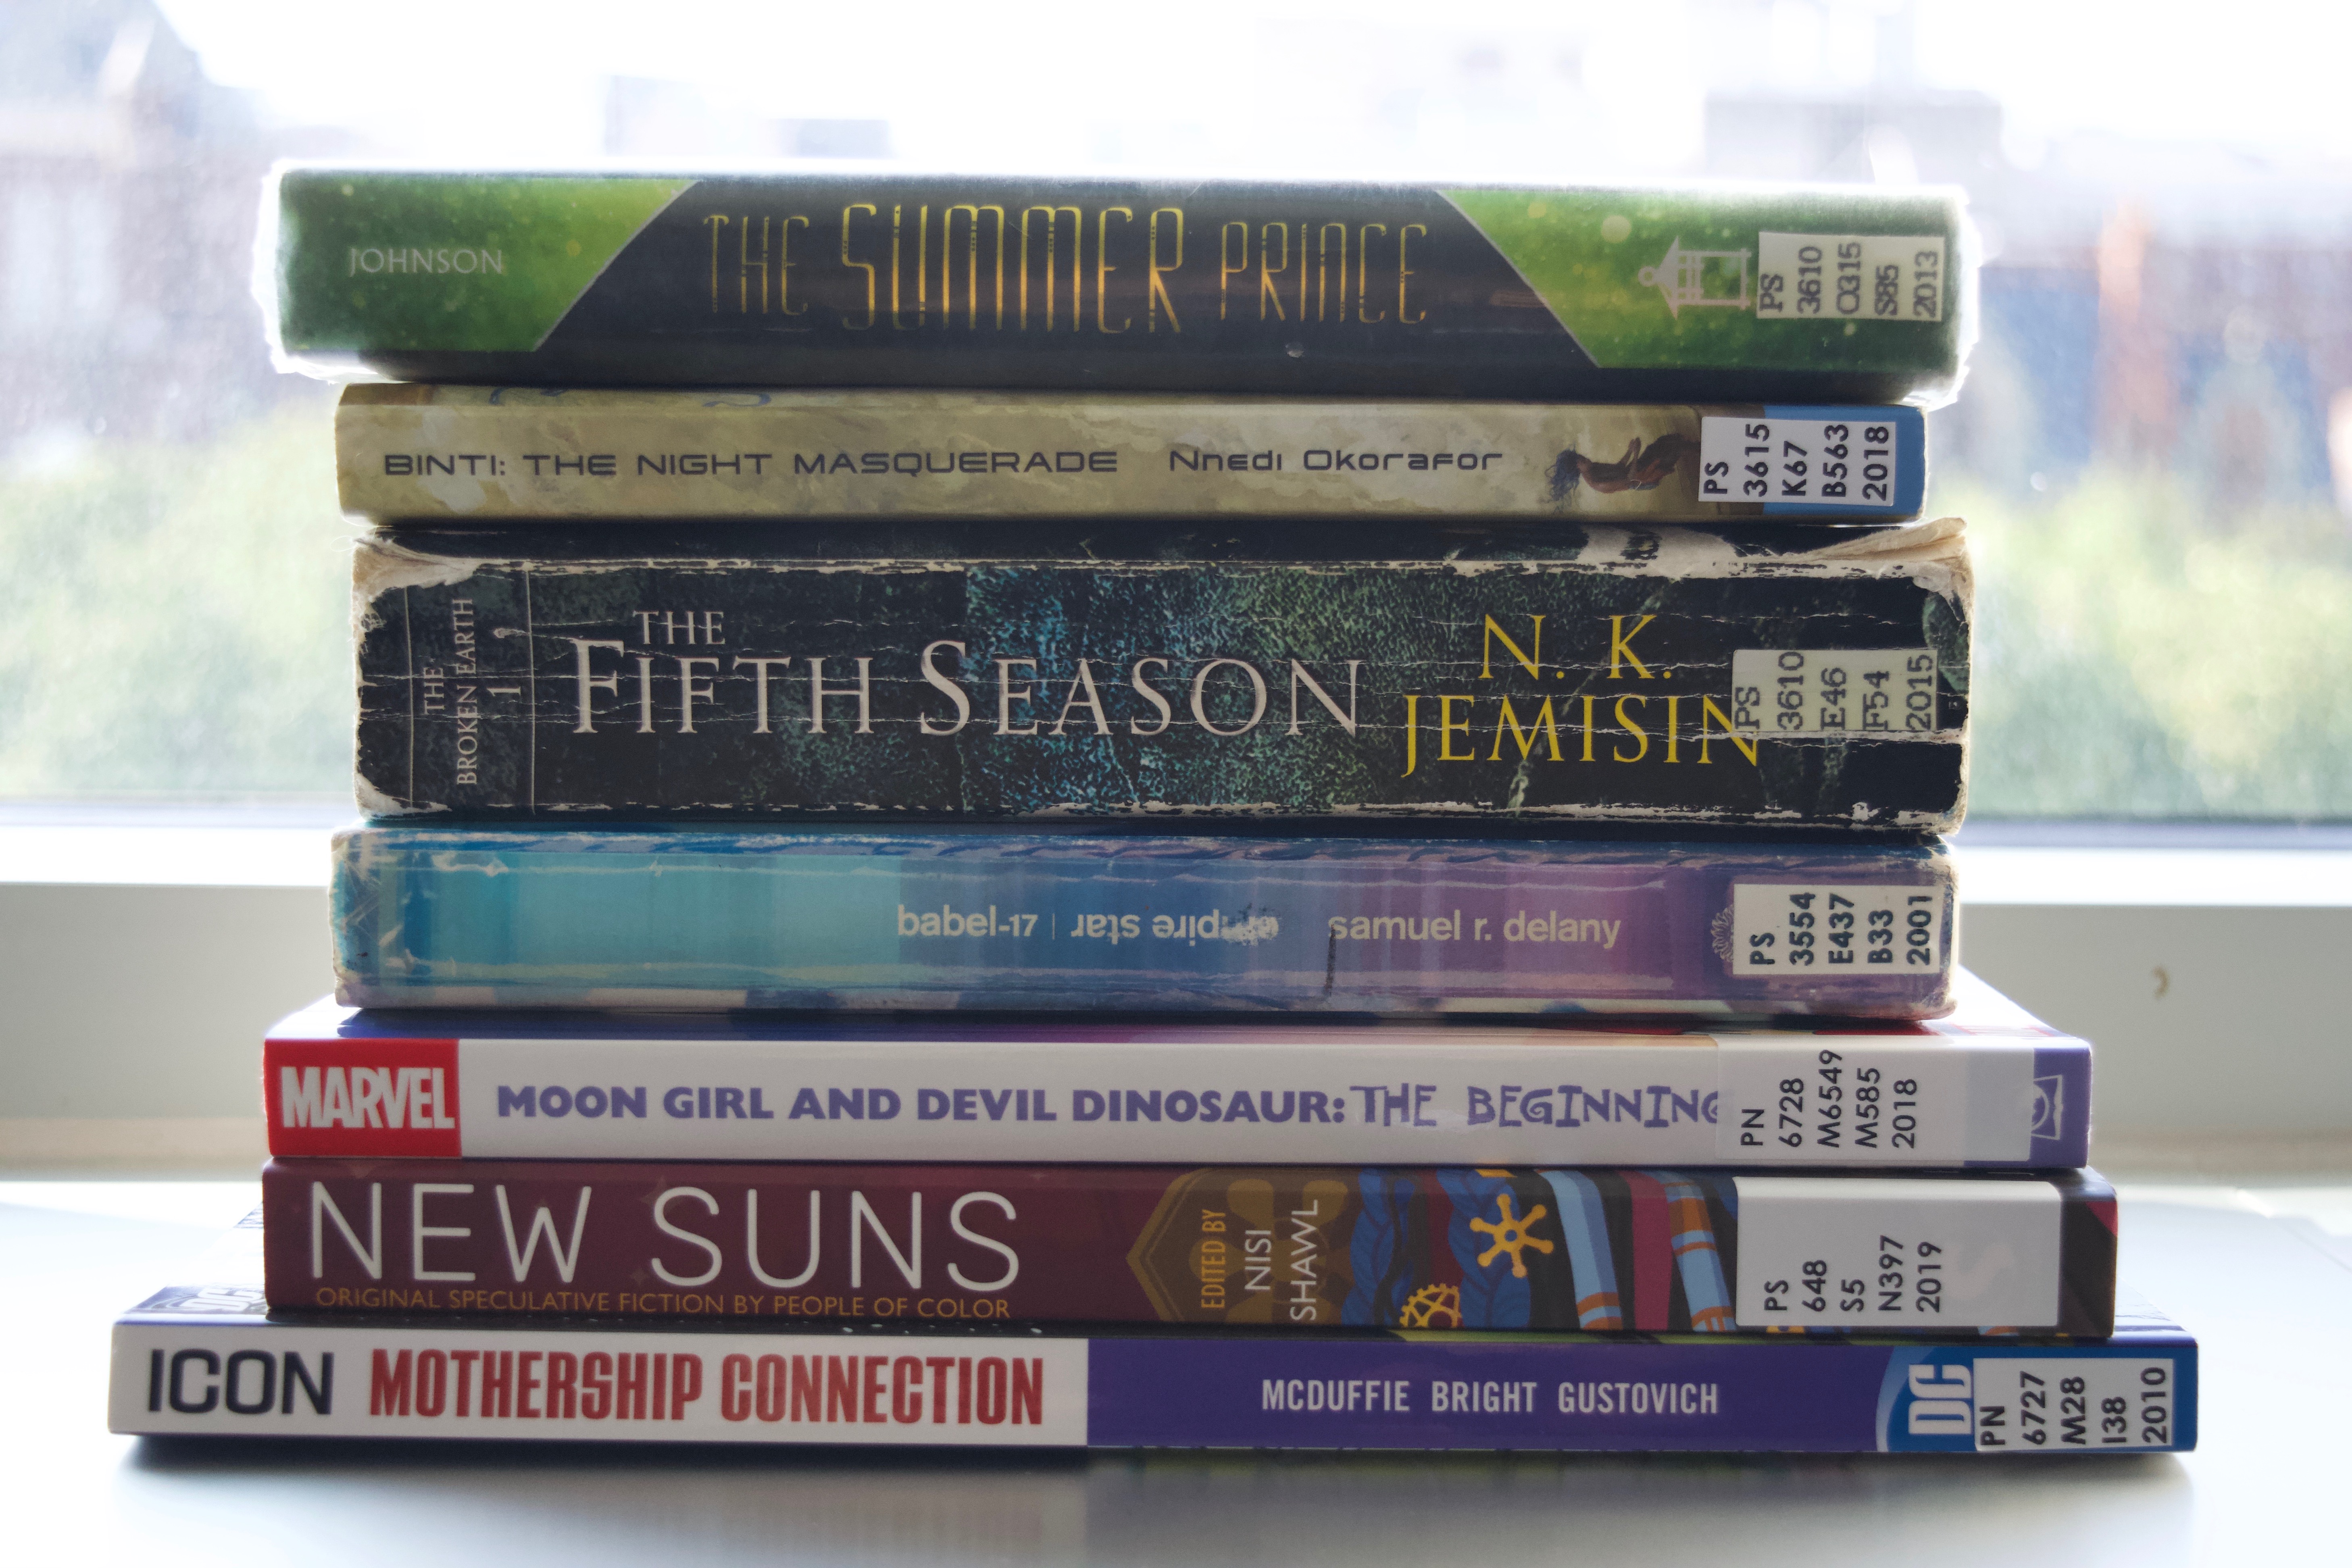 A stack of books with titles including Mothership Connection, New Suns, Moon Girl and Devil Dinosaurs, The Fifth Season, The Night Masquerade, The Summer Prince